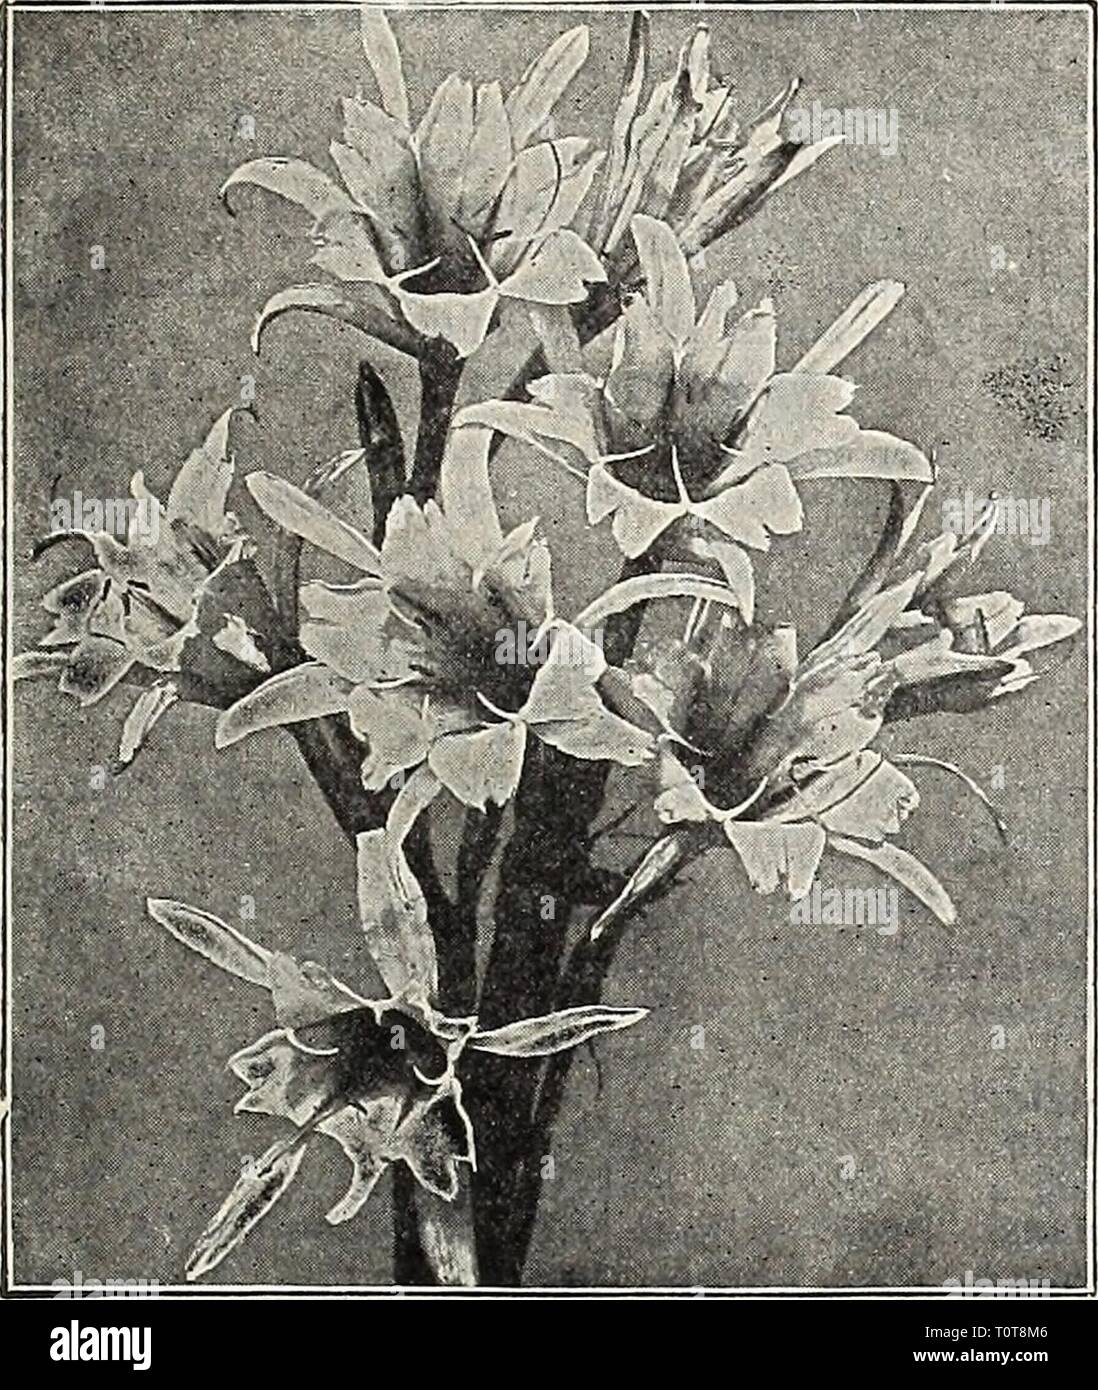 Dreer's garden book  1906 Dreer's garden book : 1906  dreersgardenbook1906henr Year: 1906  (iARDfH^^Â»OI!fEI1HOUSfPIA[1TS; 149    ISMENE CALATHINA (Pancratium). A grand summer-flowering bulb, producing throughout the seasoil large Amaryllis-like, pure white, fragrant blossoms. Keep the bulbs in a dry, warm place, and plant out in June. Bulbs can be taken up in October, and, after a few weeks' rest, ]iotted and flowered in the liouse in winter, or kept over for planting out another season. (See cut.) 25 els. each; $2.50 per doz. IXORAS. These are among the showiest of our stove flowering plants Stock Photo